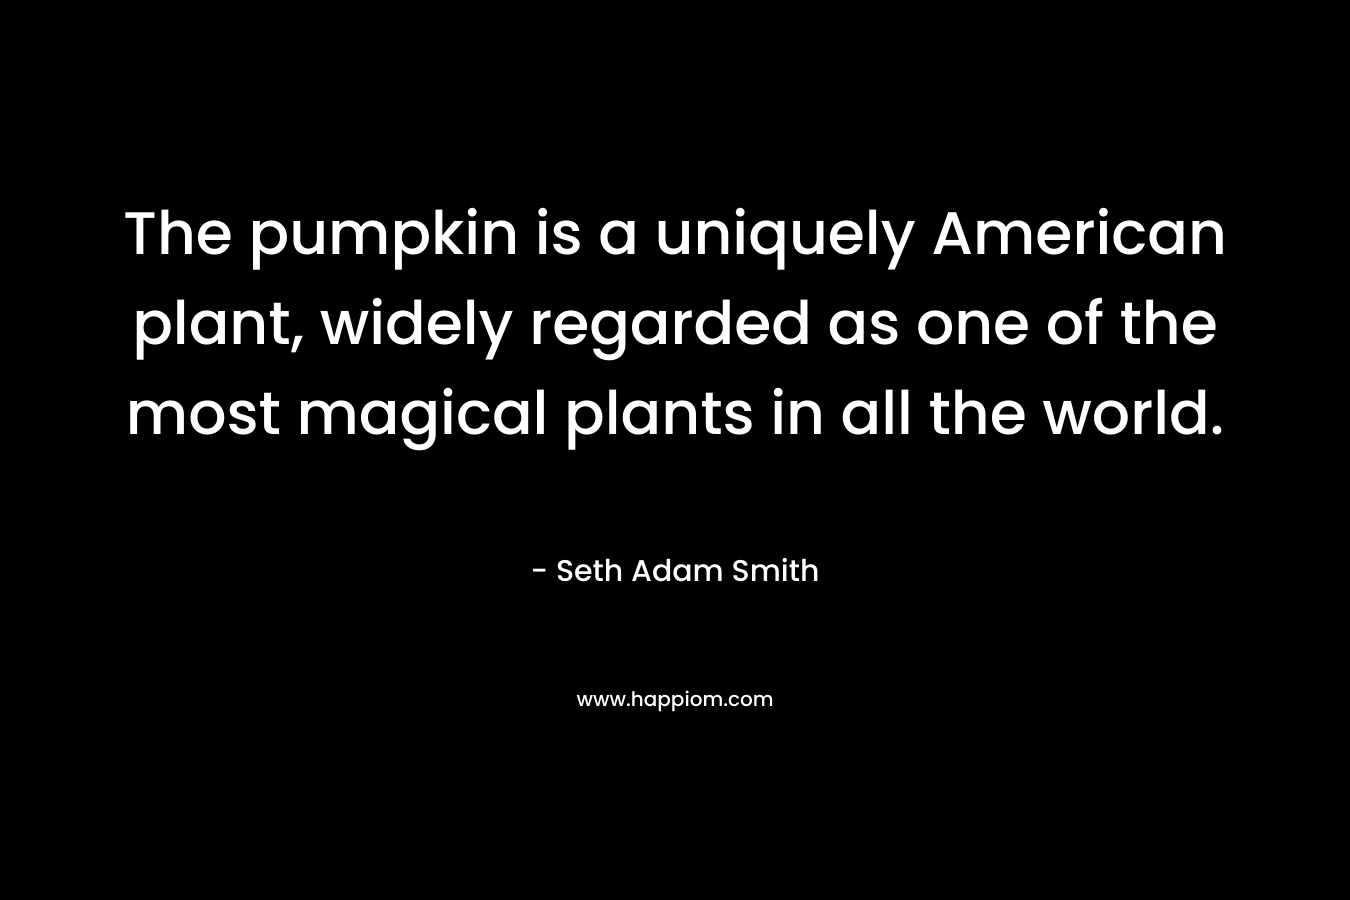 The pumpkin is a uniquely American plant, widely regarded as one of the most magical plants in all the world. – Seth Adam Smith